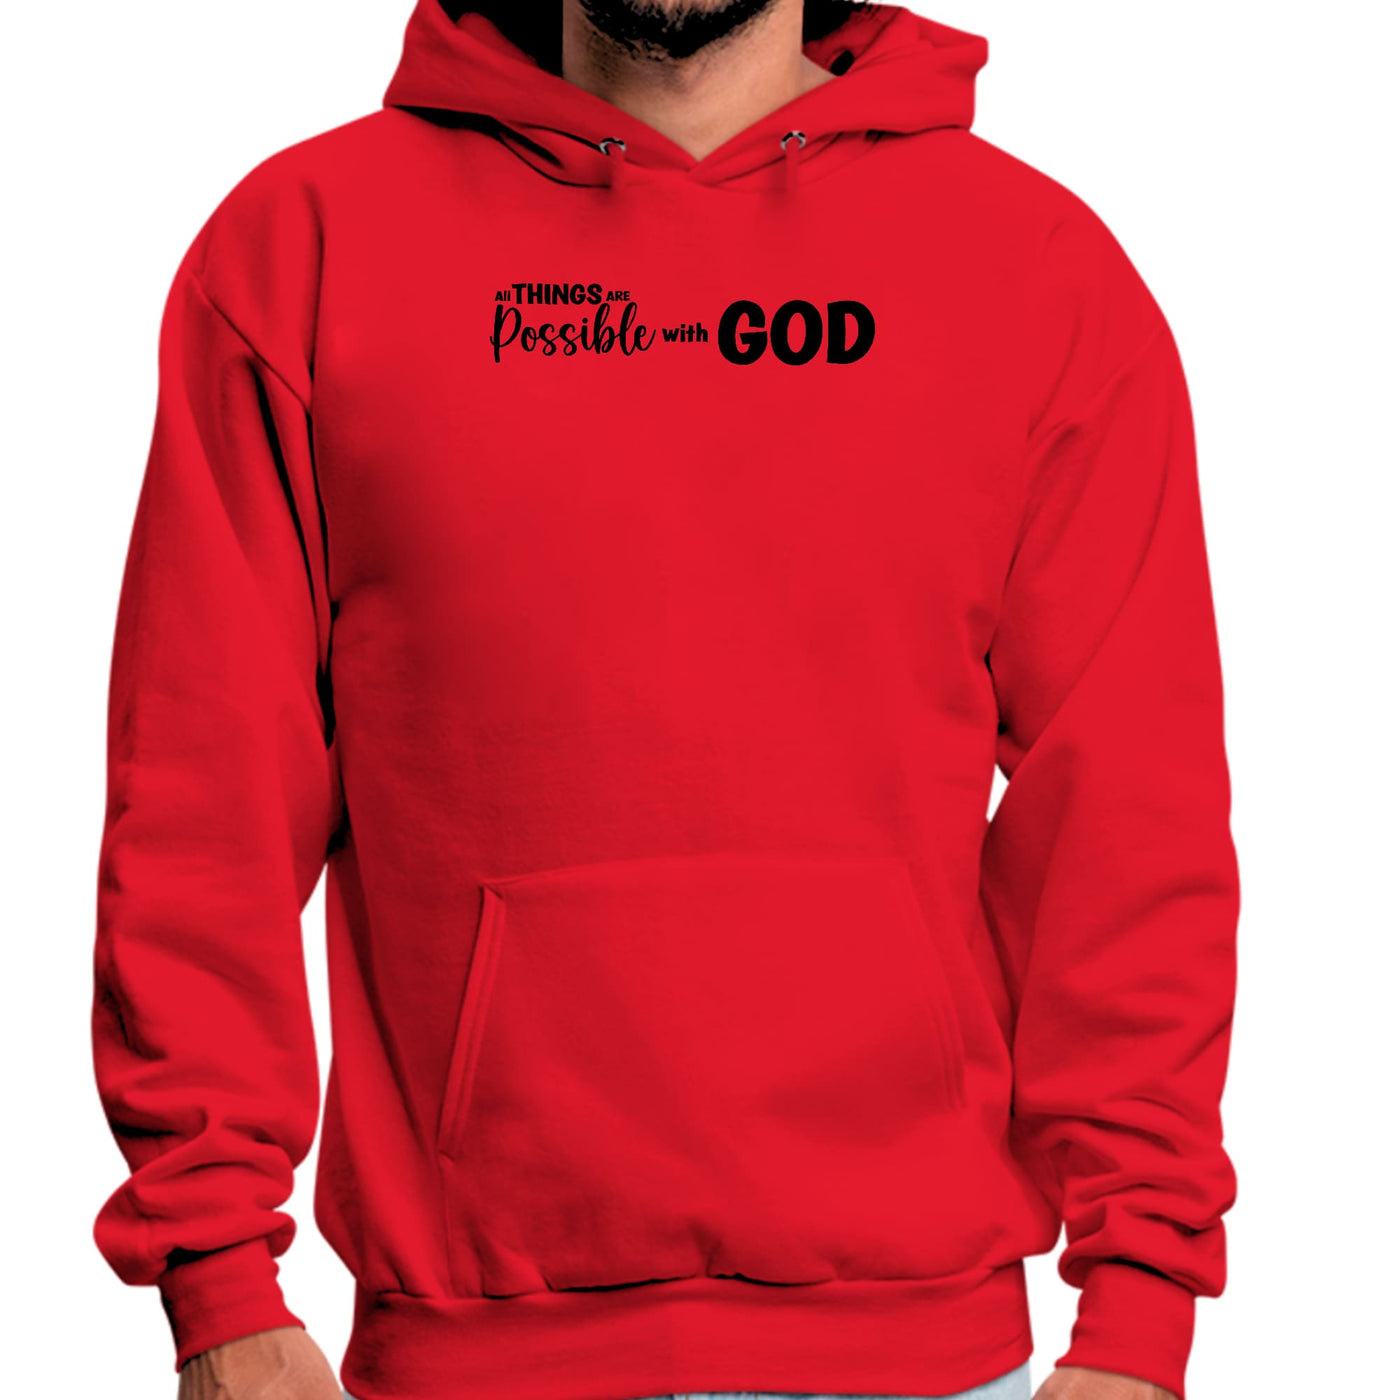 Mens Graphic Hoodie All Things Are Possible With God - Black - Unisex | Hoodies